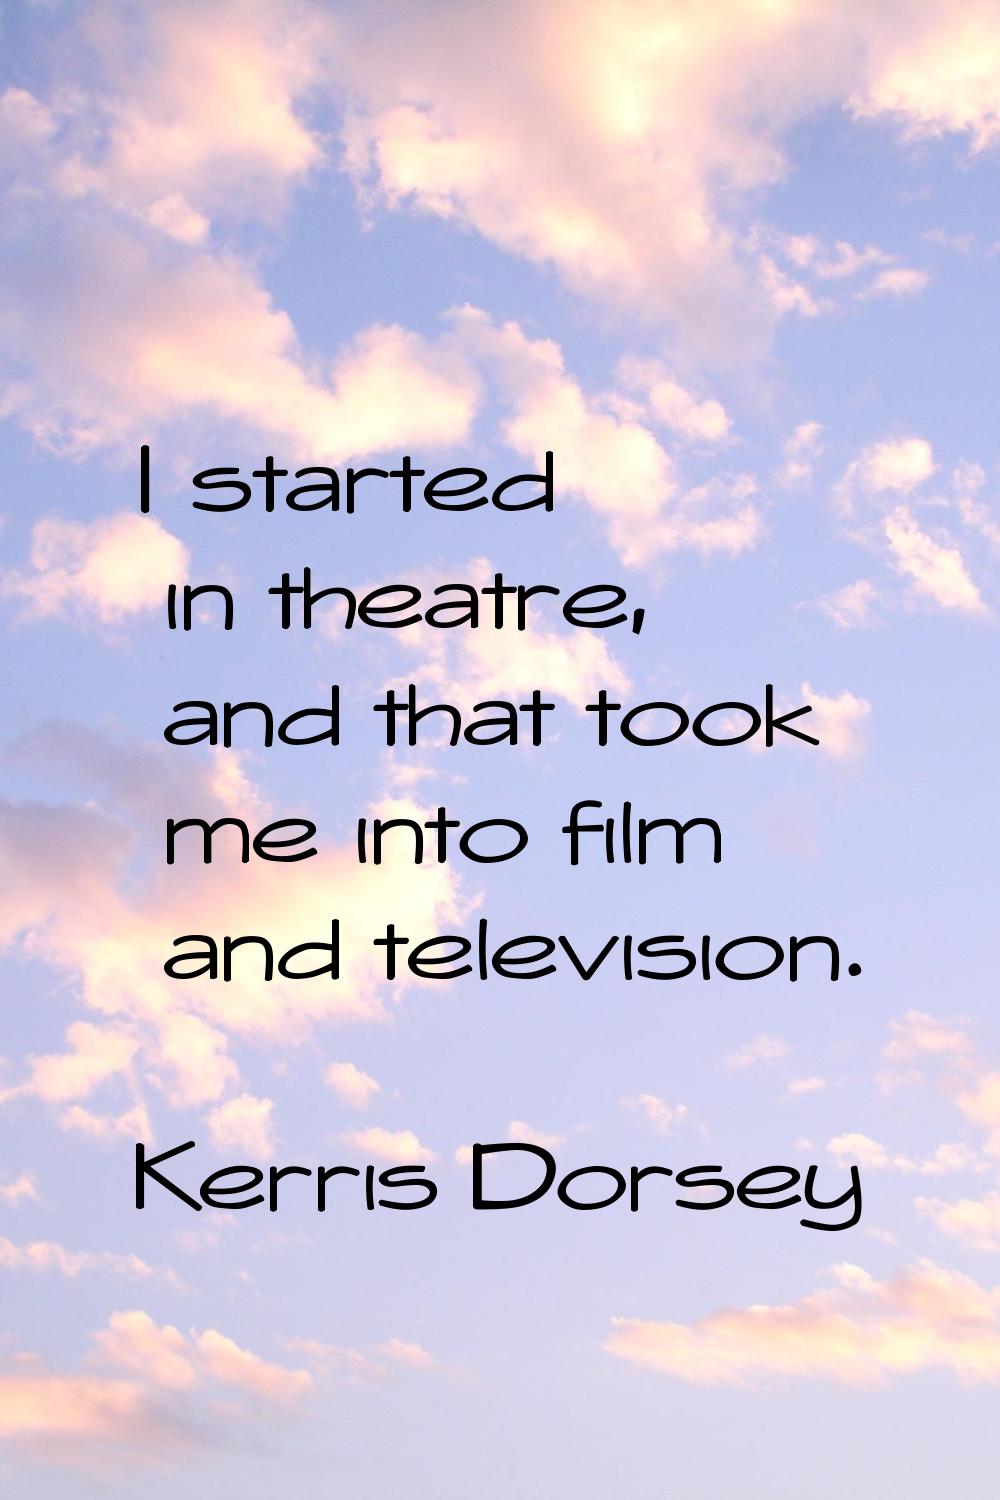 I started in theatre, and that took me into film and television.